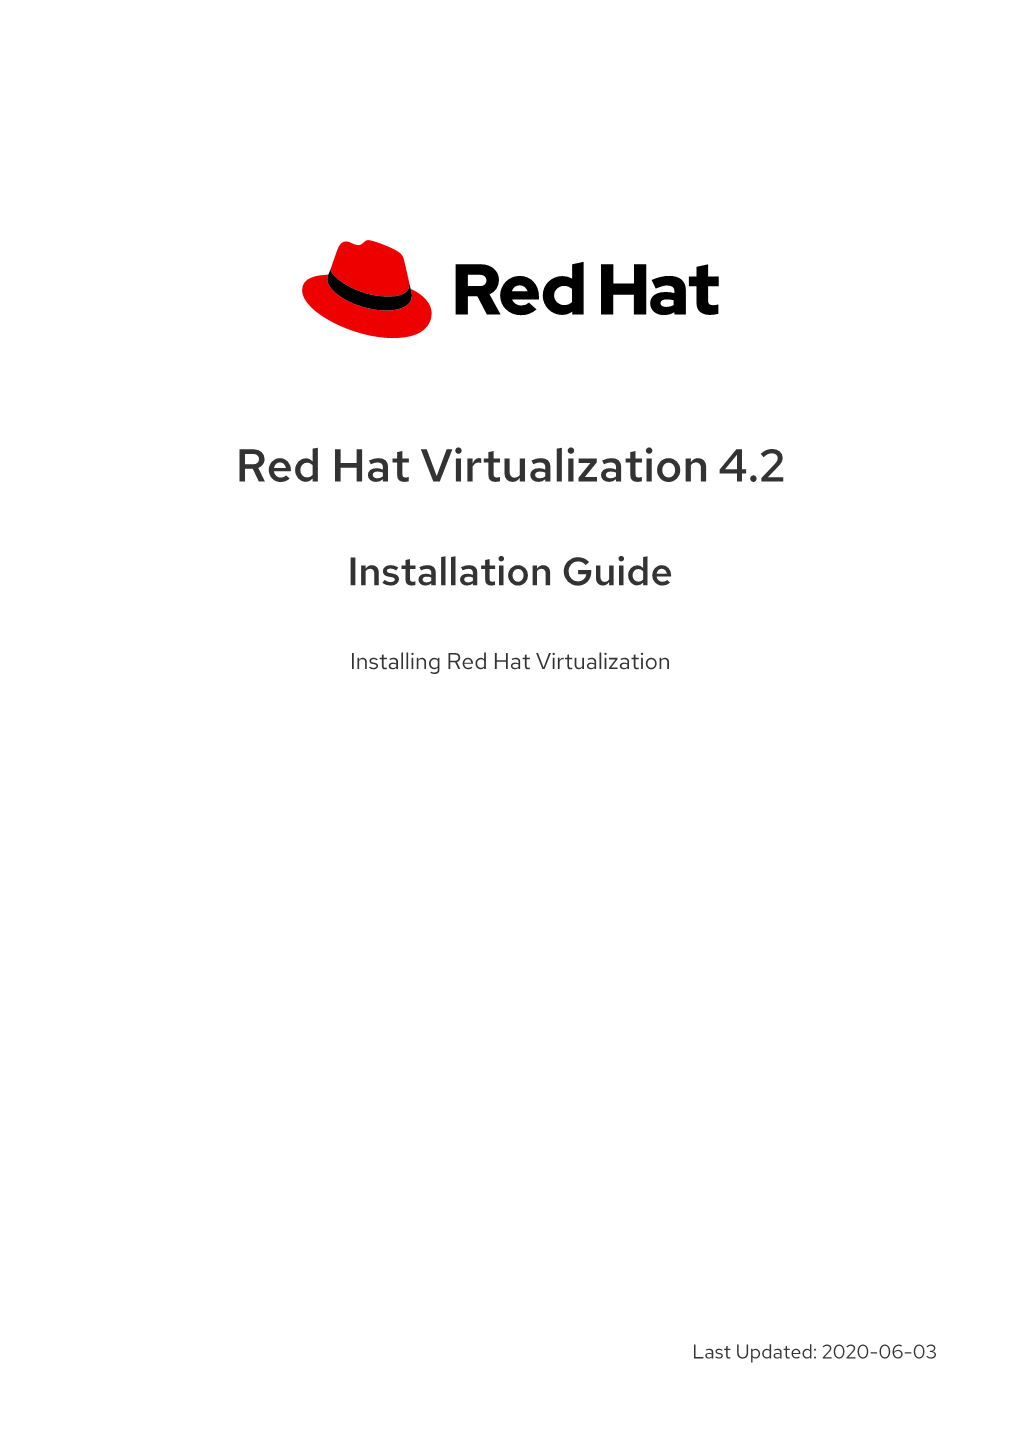 Red Hat Virtualization 4.2 Installation Guide